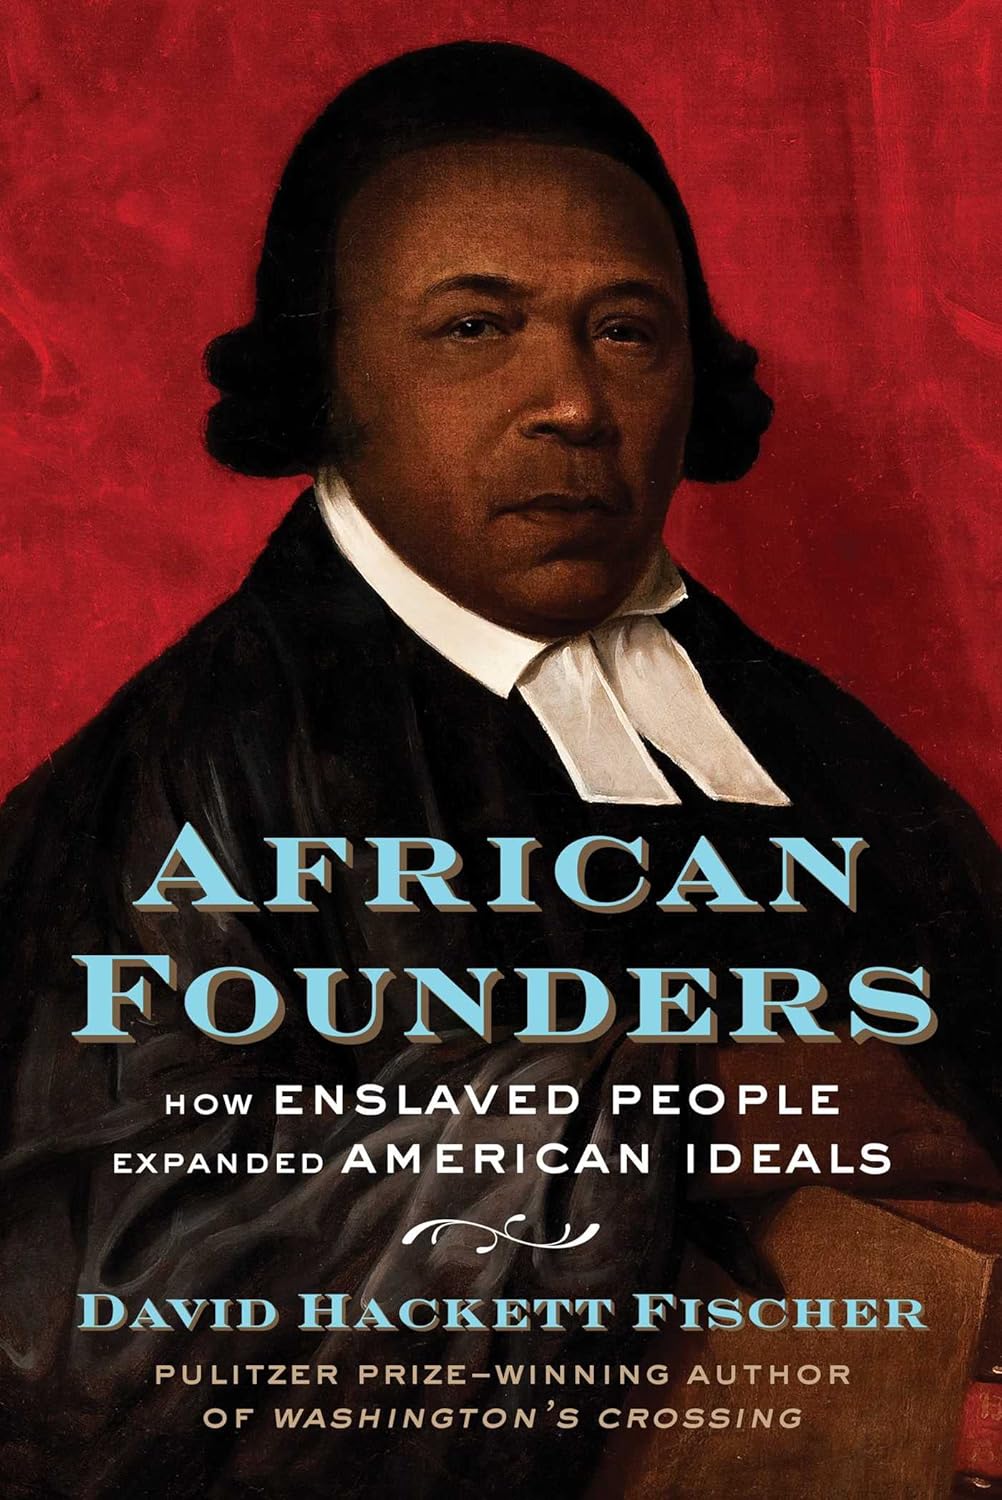 African Founders and Albion’s Seed